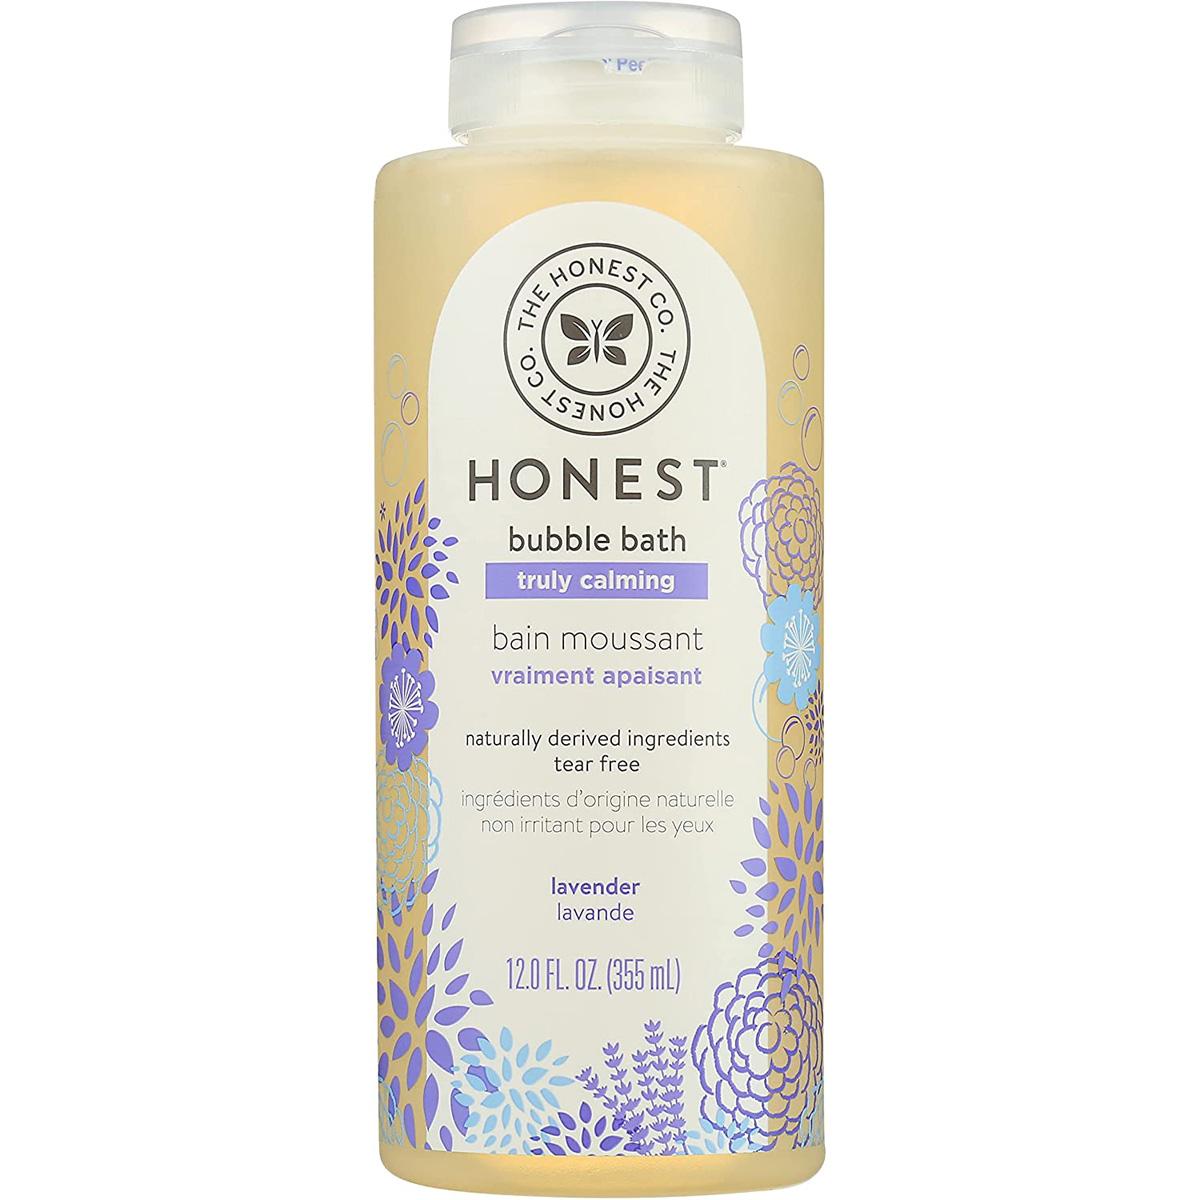 The Honest Company Truly Calming Lavender Bubble Bath for $7.74 Shipped